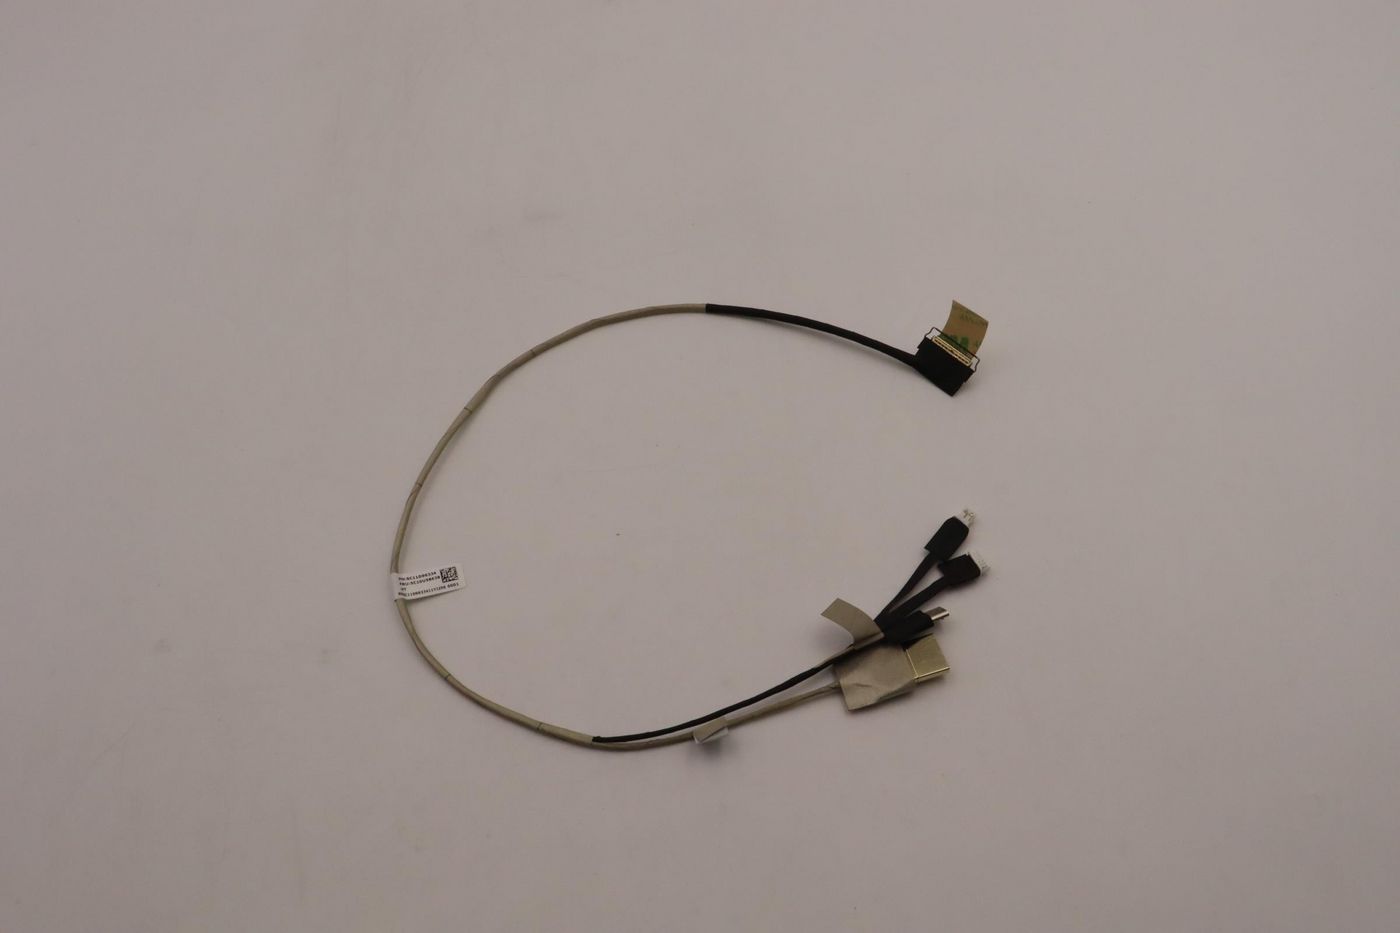 Lenovo 5C10U58638 W126991106 CABLE WL projector C.A. cable 